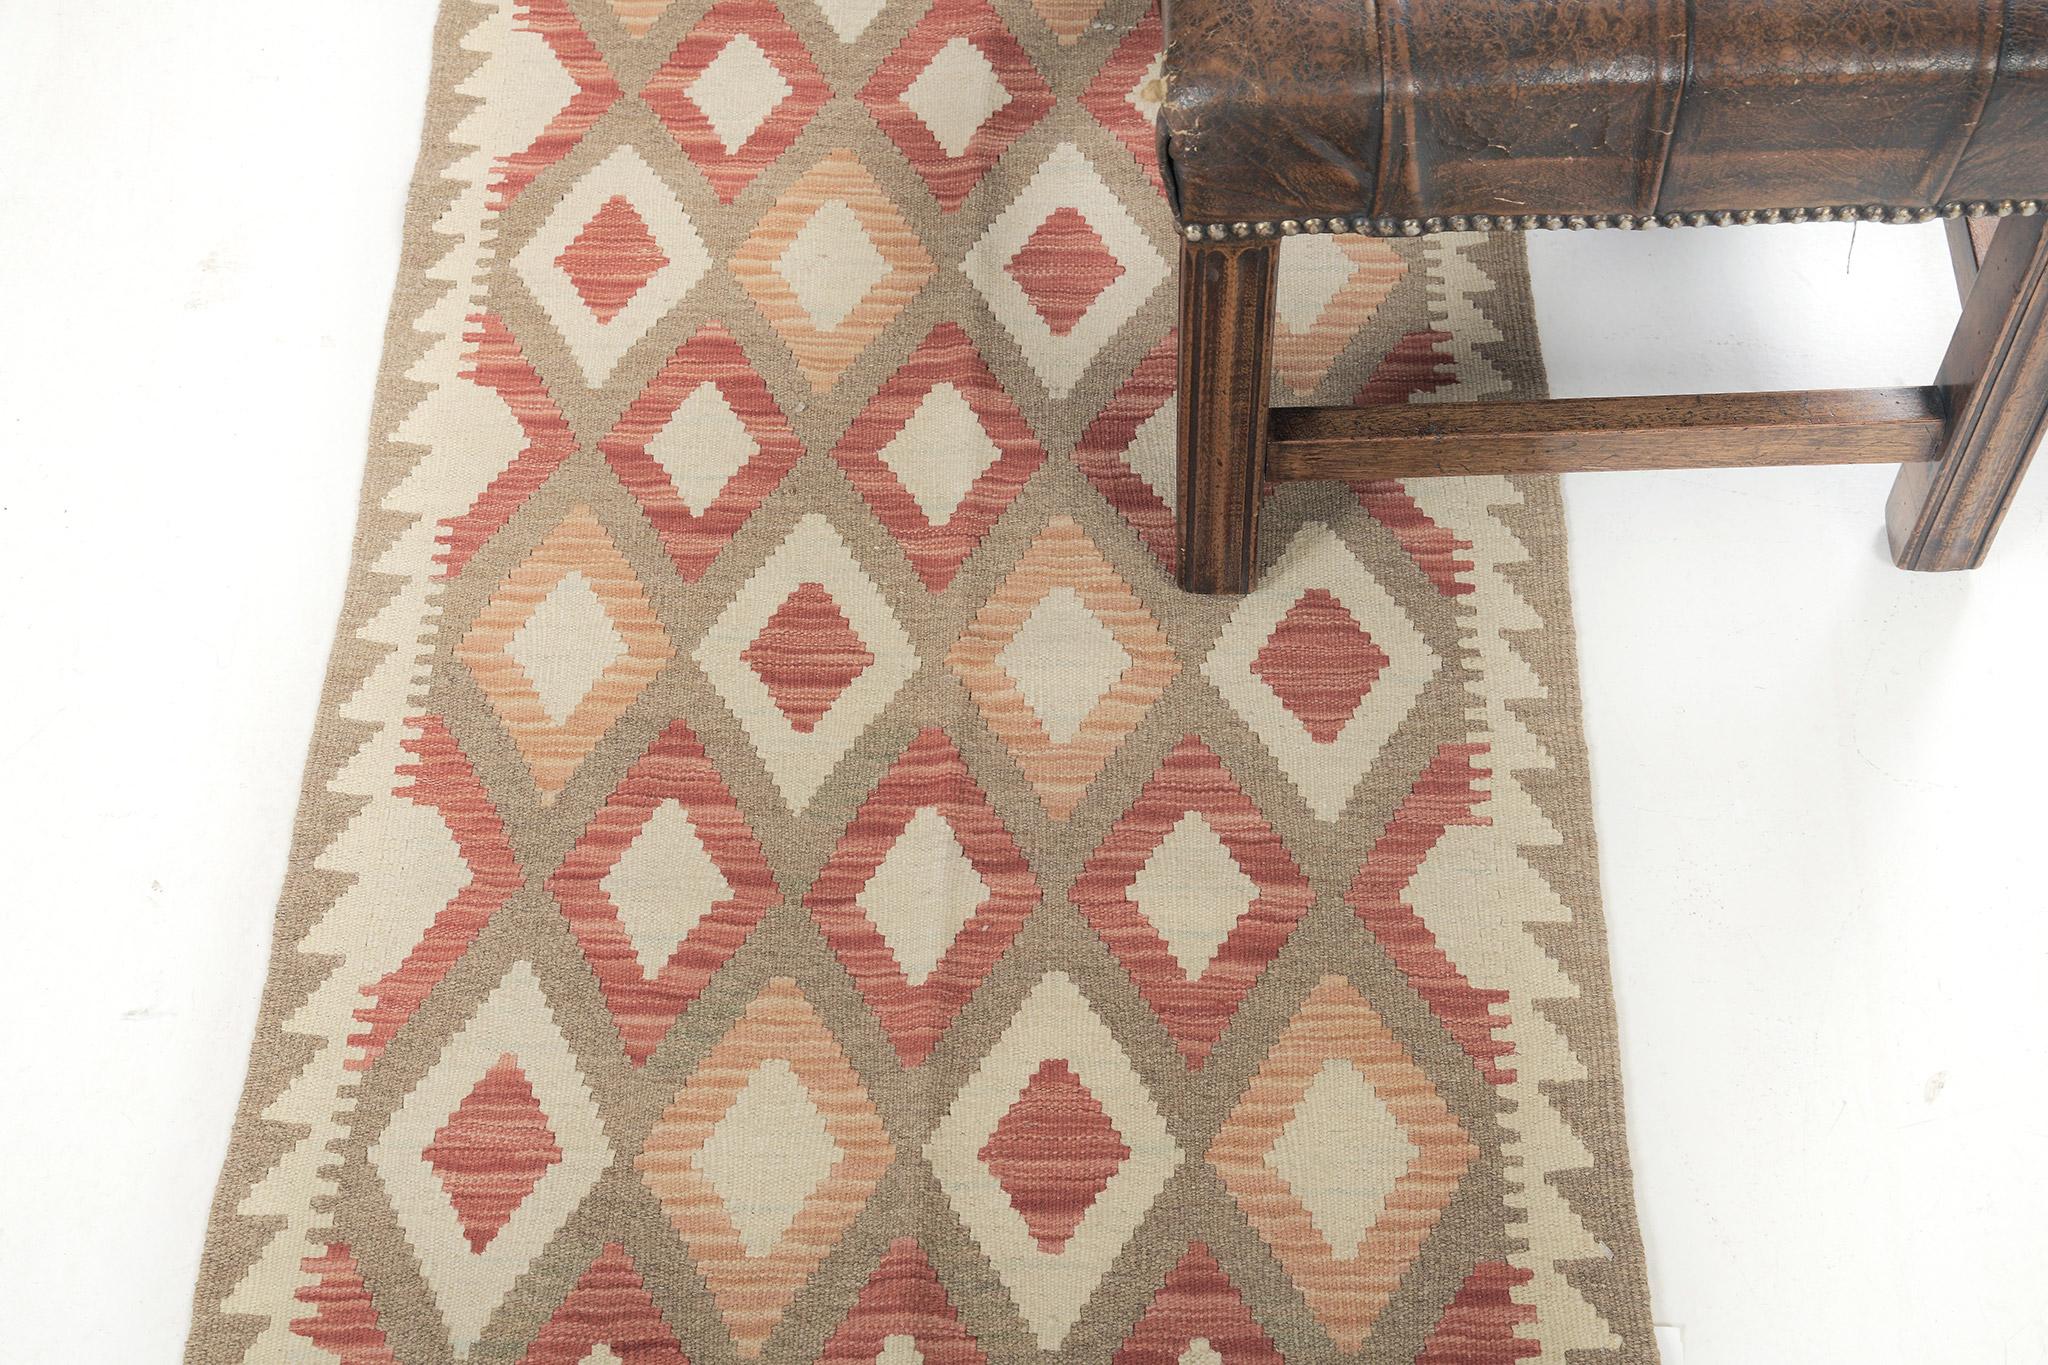 A timeless vintage-styled flatweave Kilim features tribal motifs through a warm-toned palette. The multicolored diamond patterns create a joyous and charming design for a variety of interiors. This such kinds of rugs bring your room more